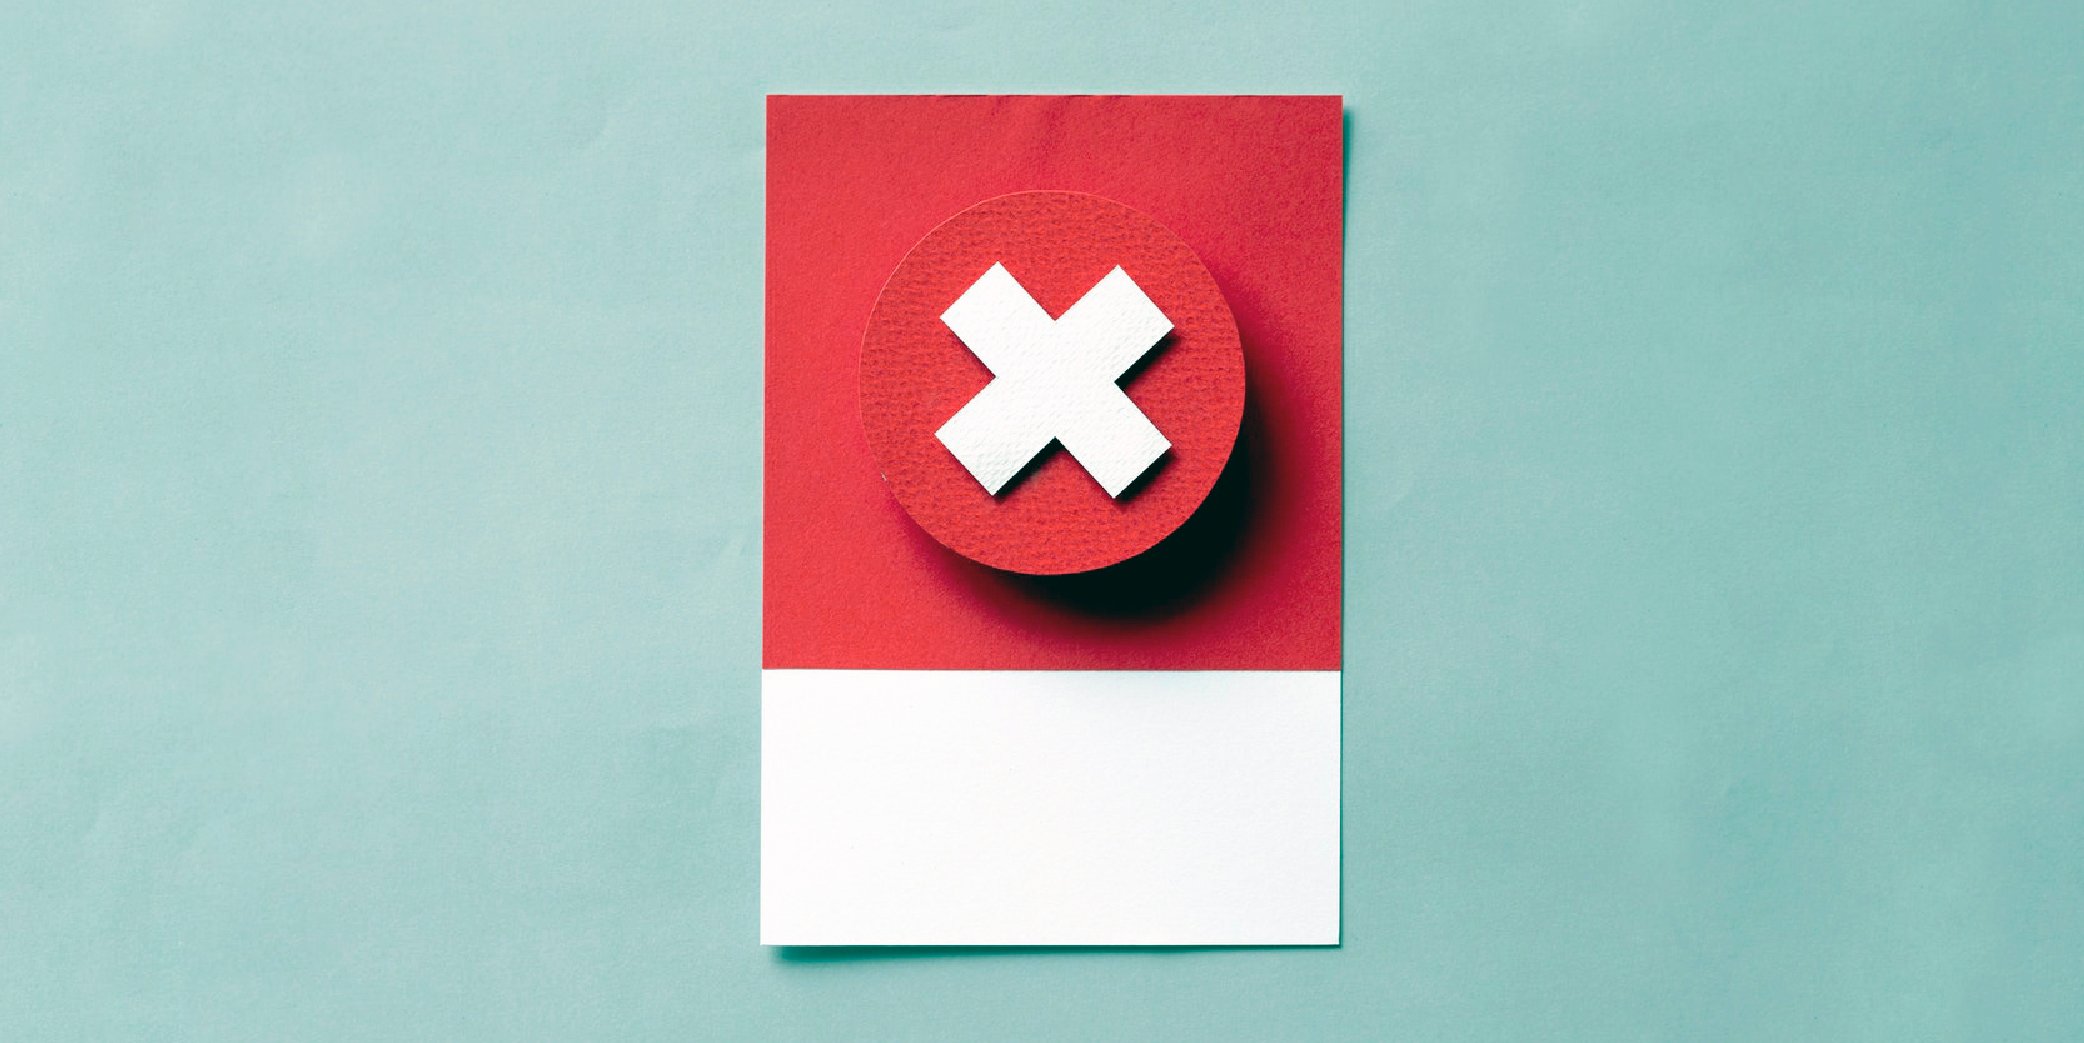 A white 'x' on top of a red circle